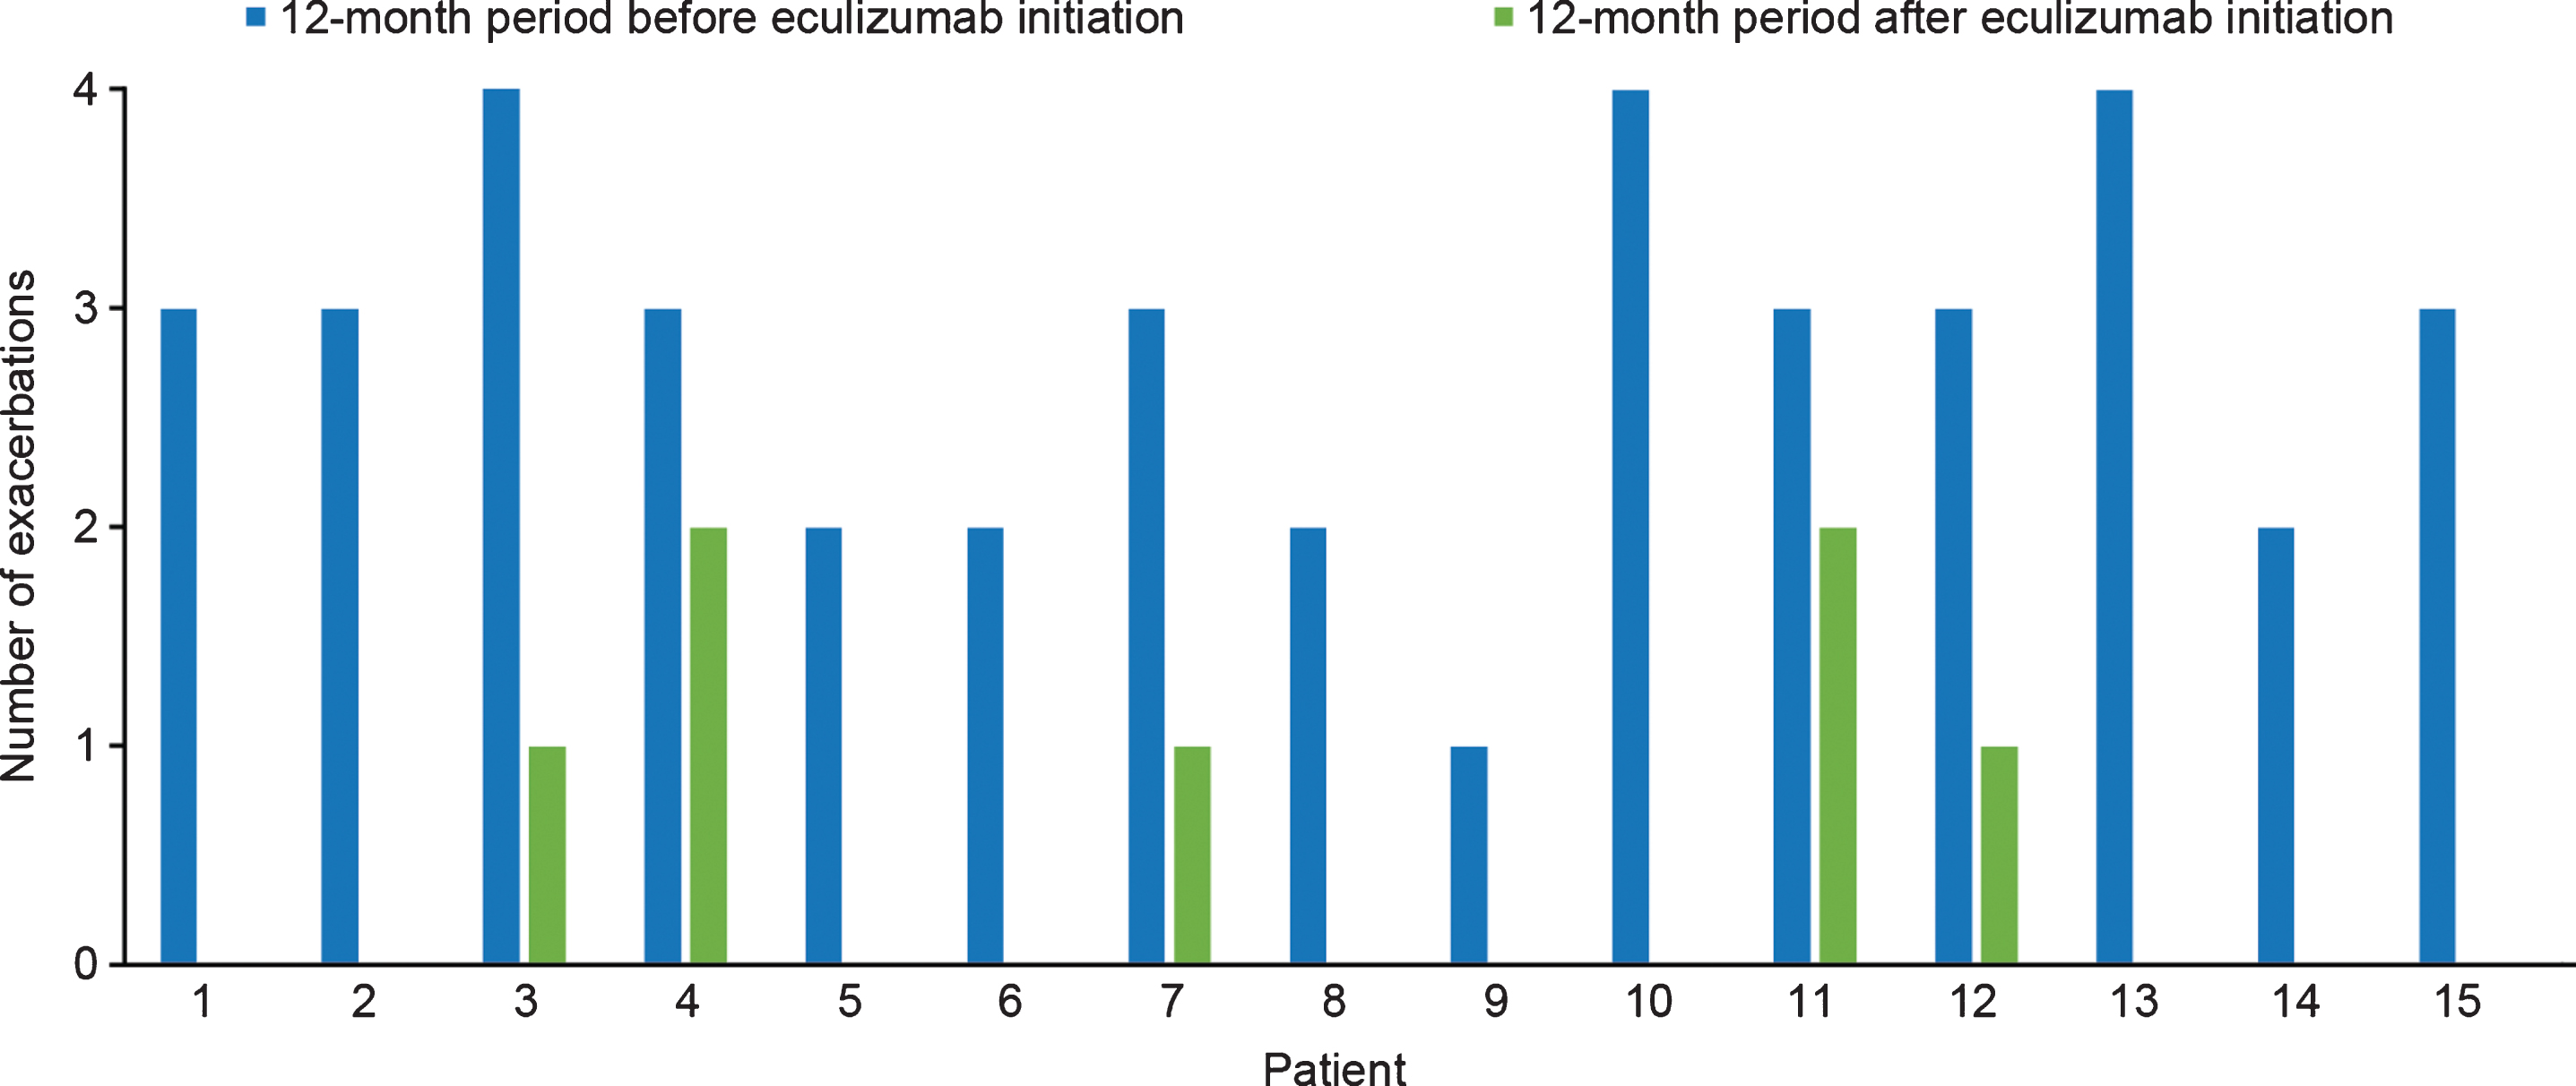 Number of acute exacerbations before and after eculizumab initiation for individual patients with acetylcholine receptor antibody-positive generalized myasthenia gravis (n = 15).